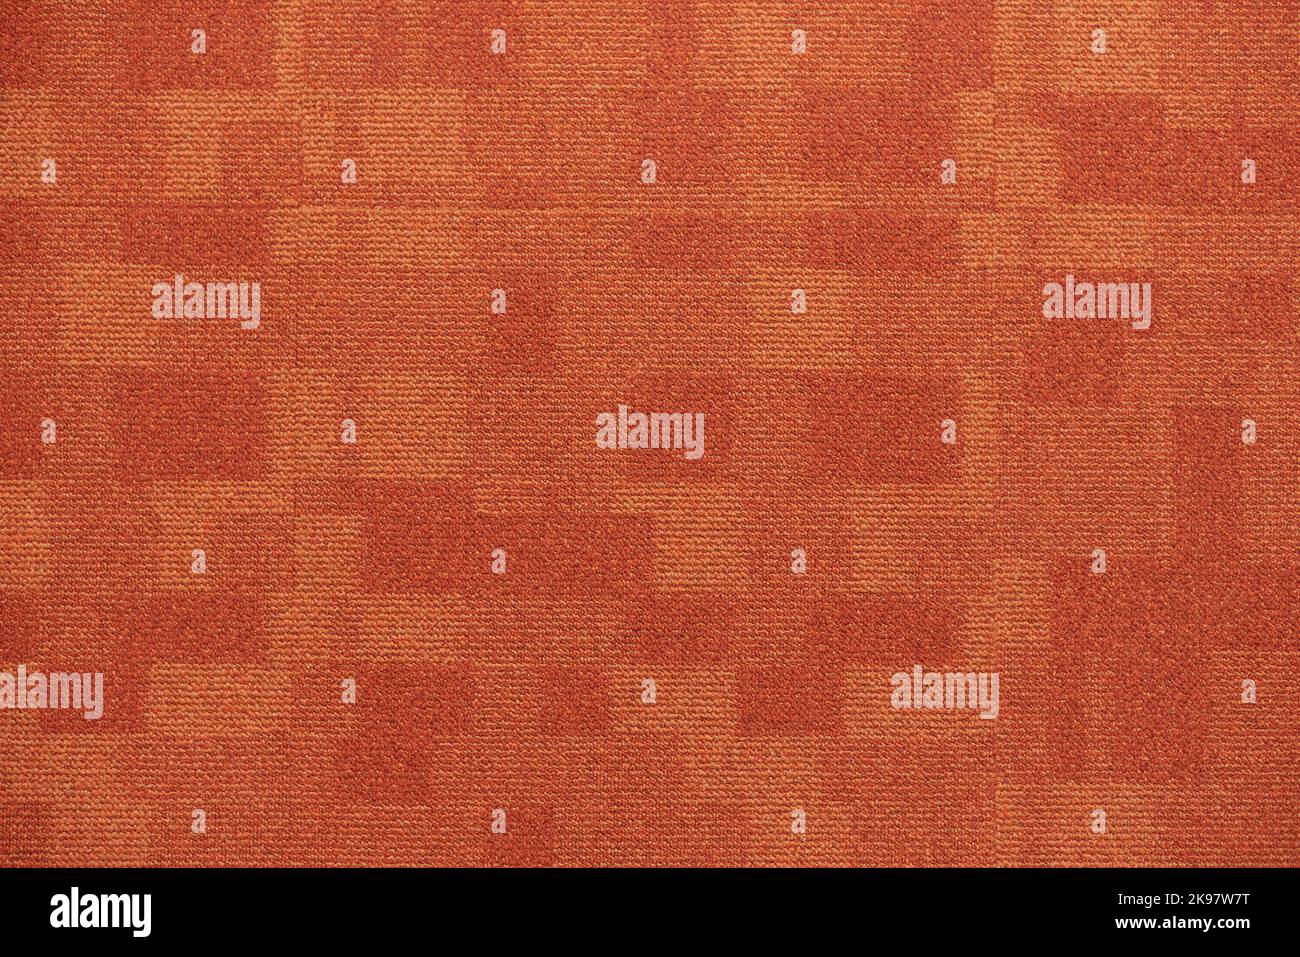 Texture carpet covering, red with a pattern of squares. Stock Photo